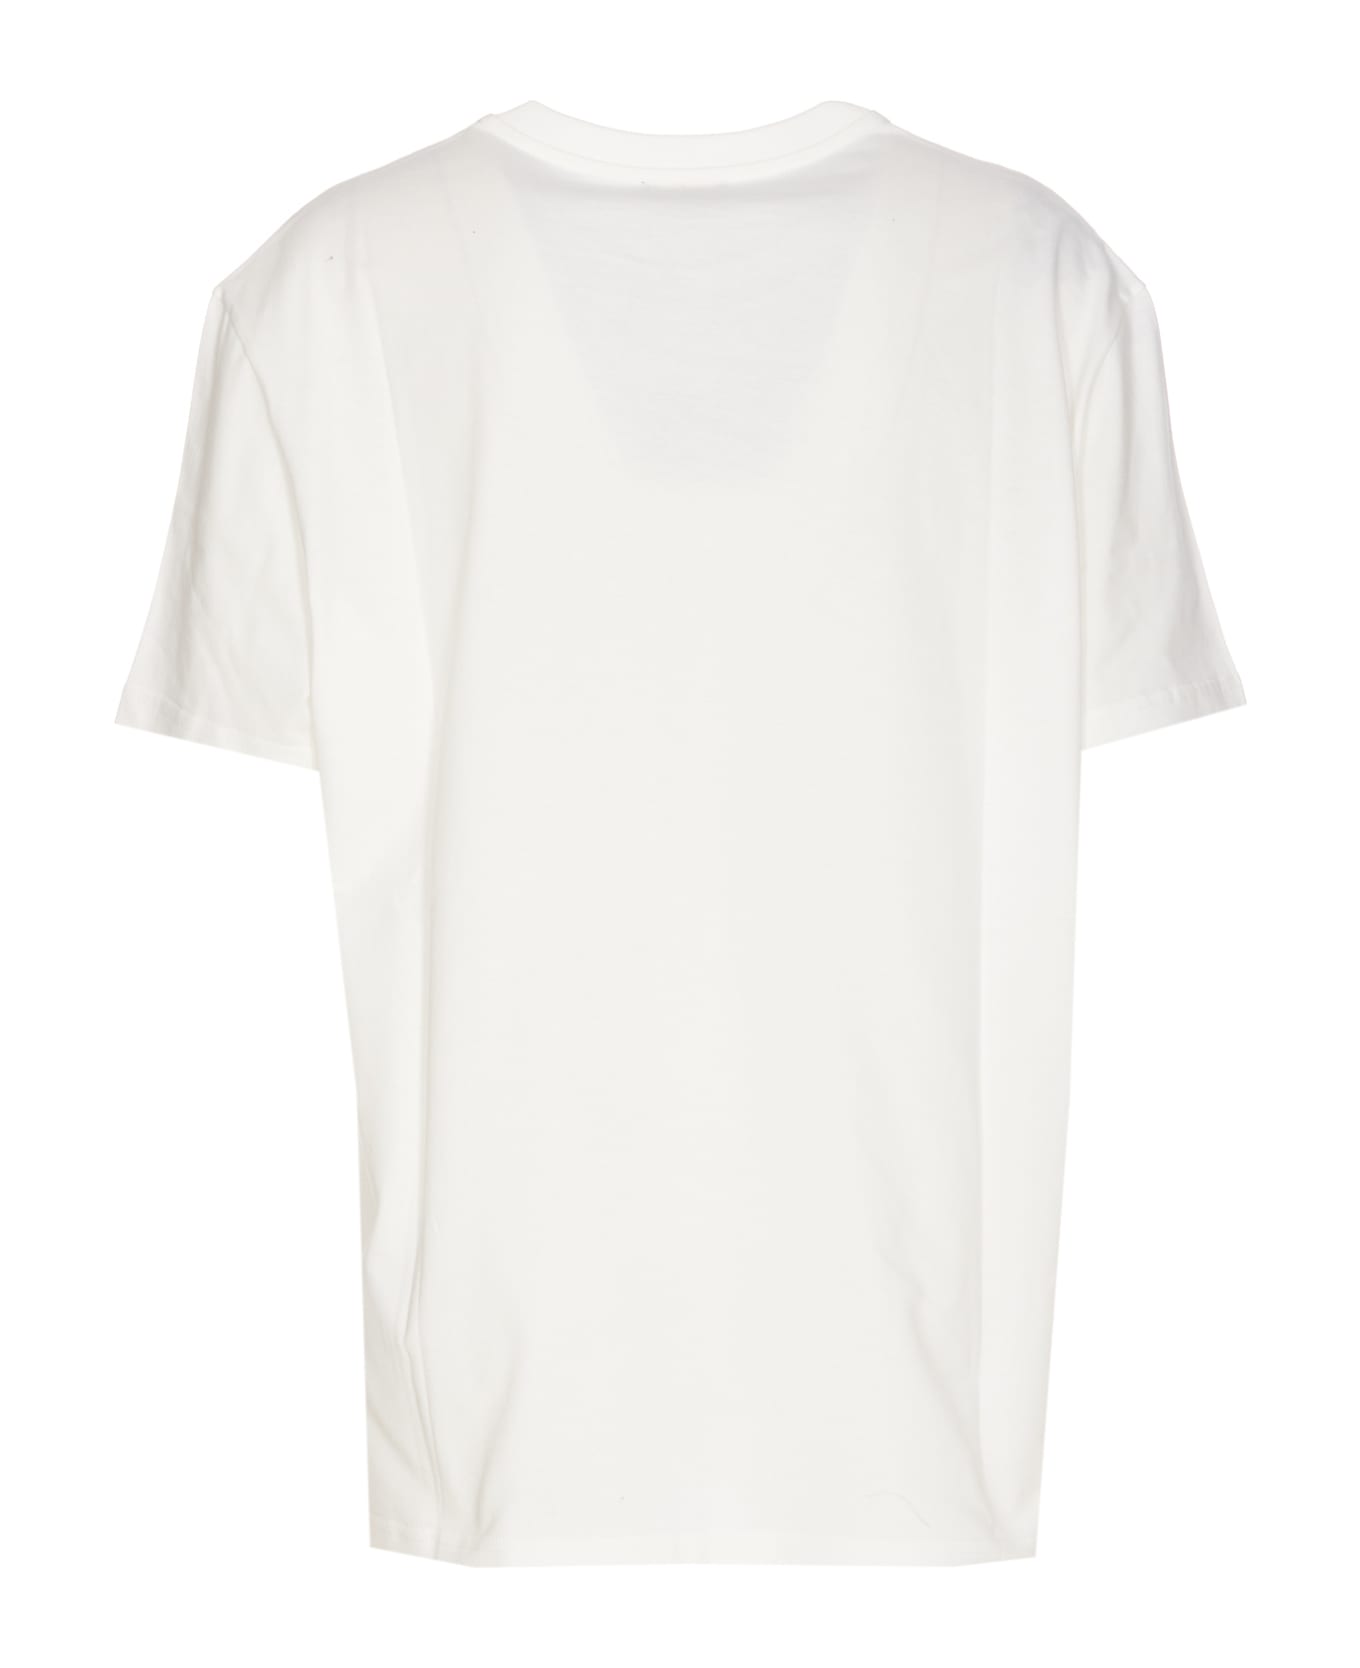 Etro Embroidered T-shirt - White